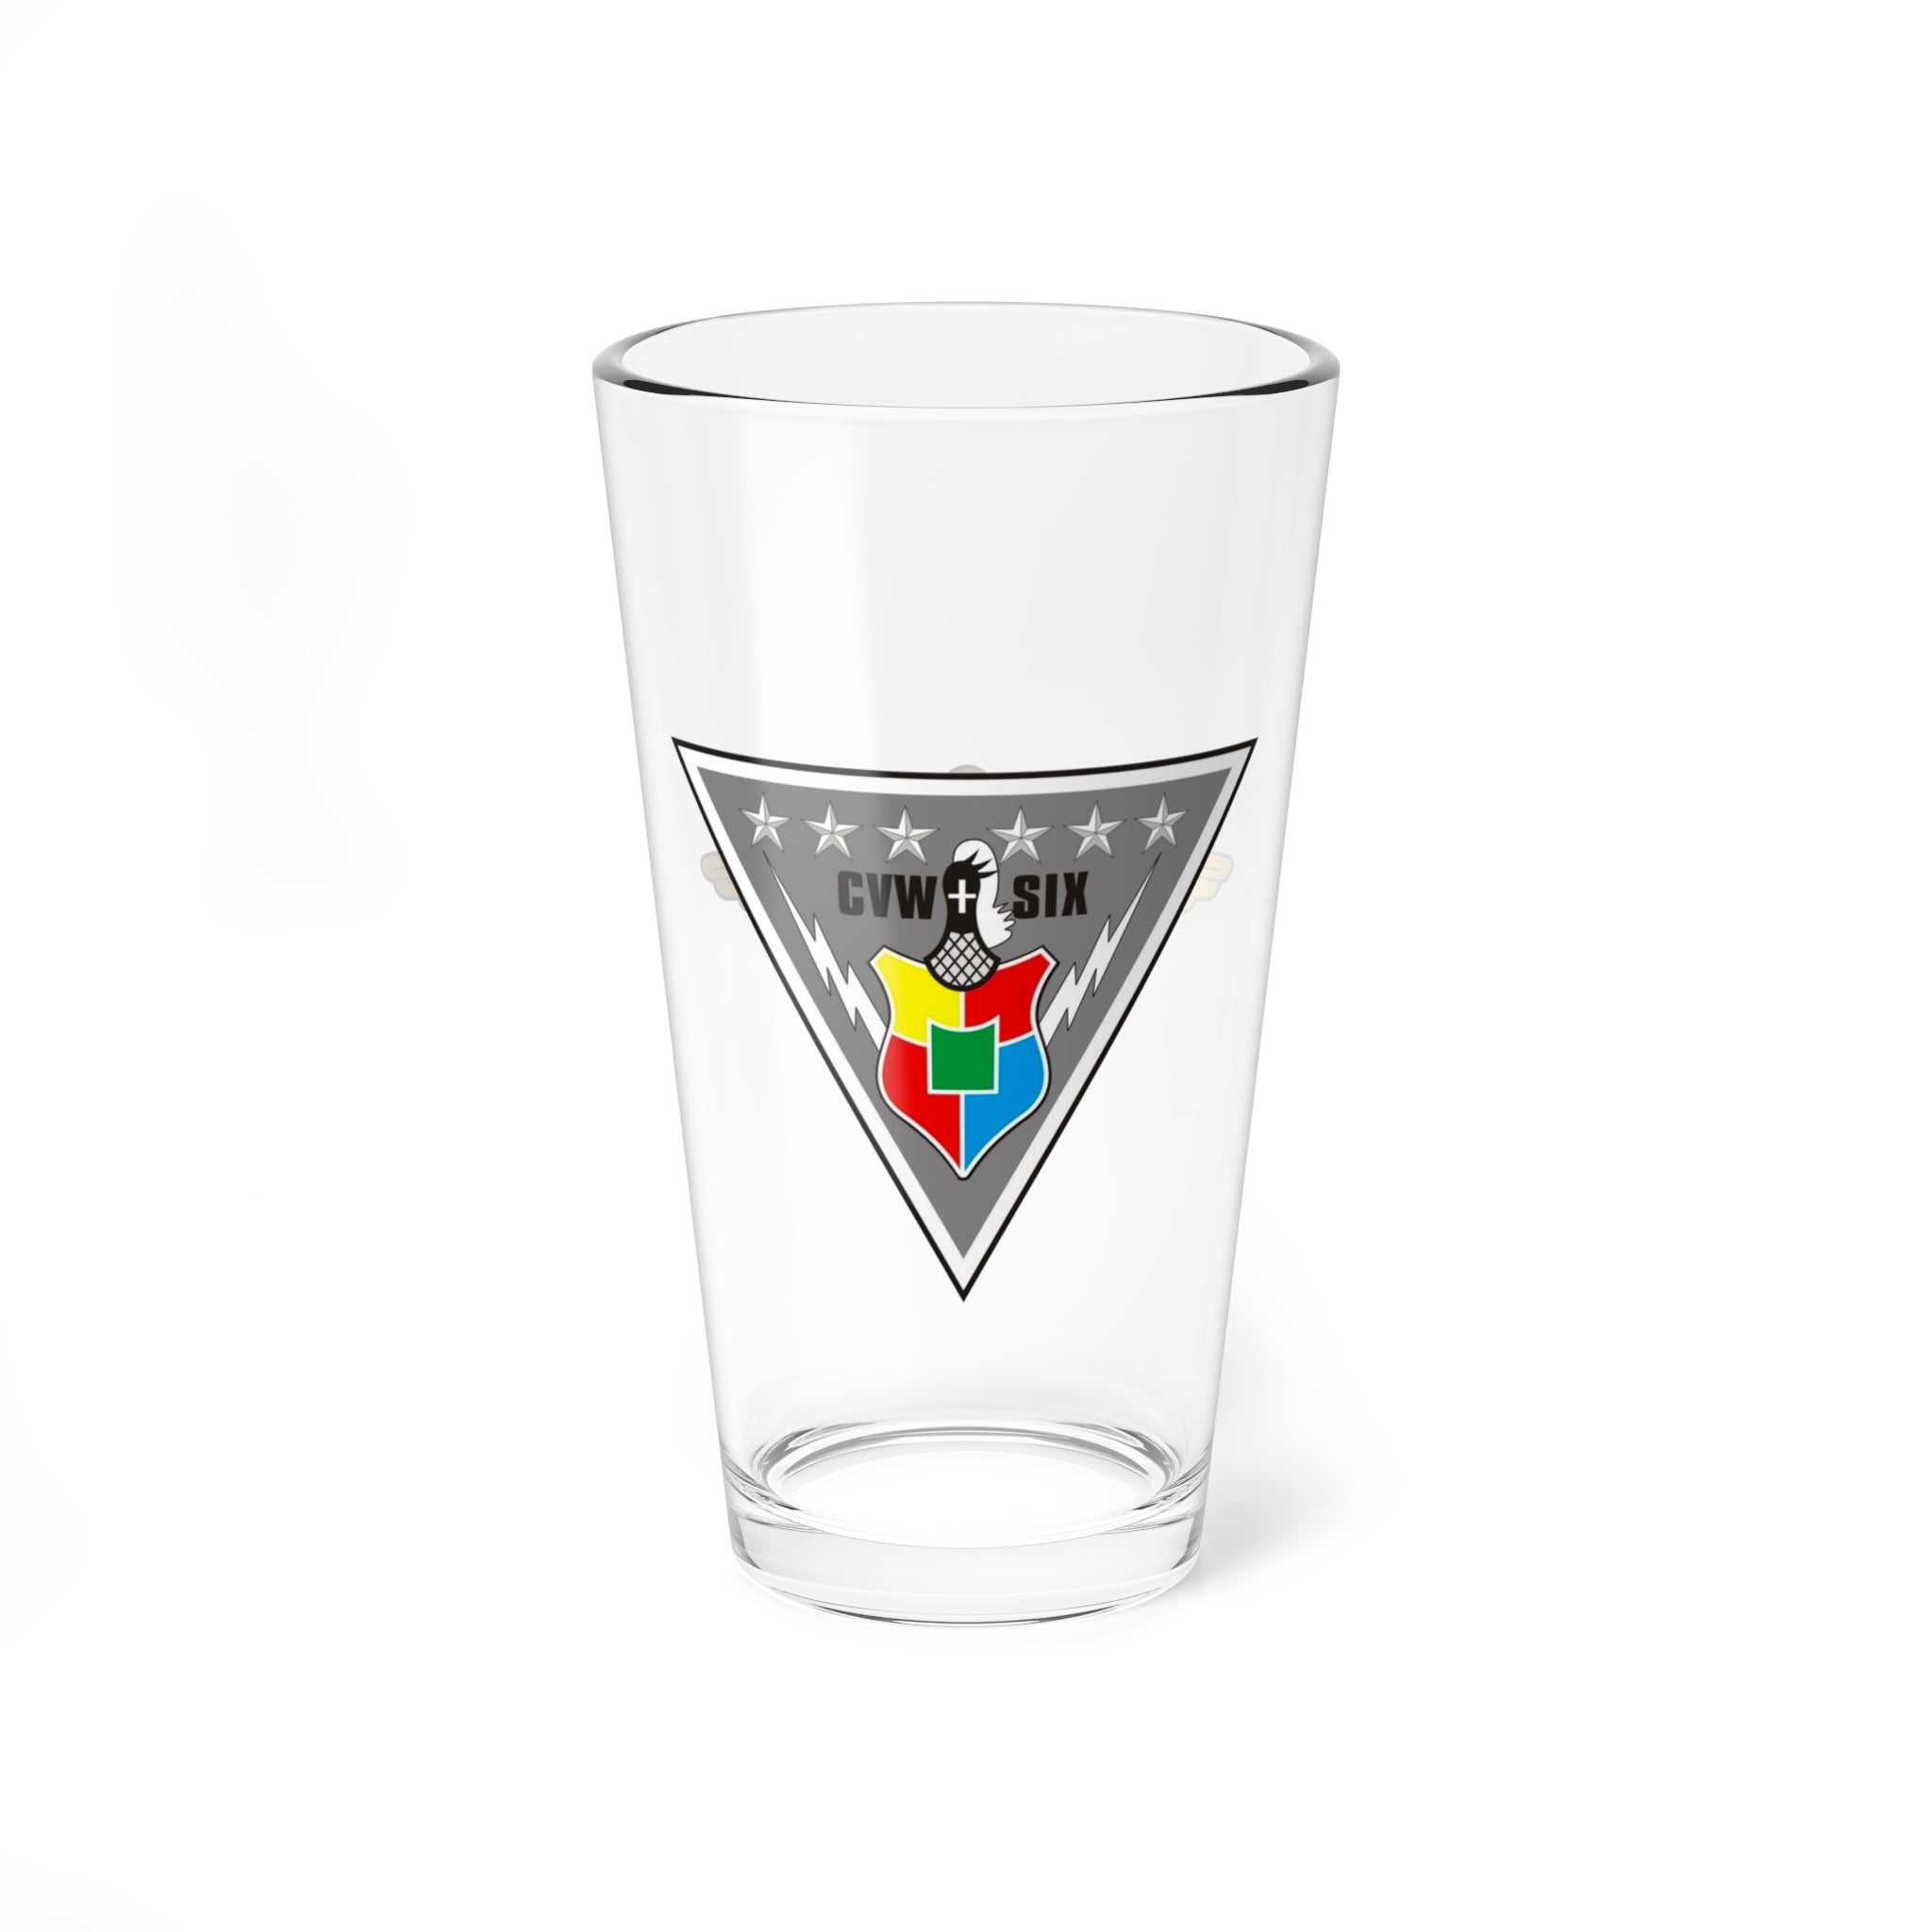 CVW-6 "Carrier Airwing Six" with Naval Aviator Wings Pint Glass